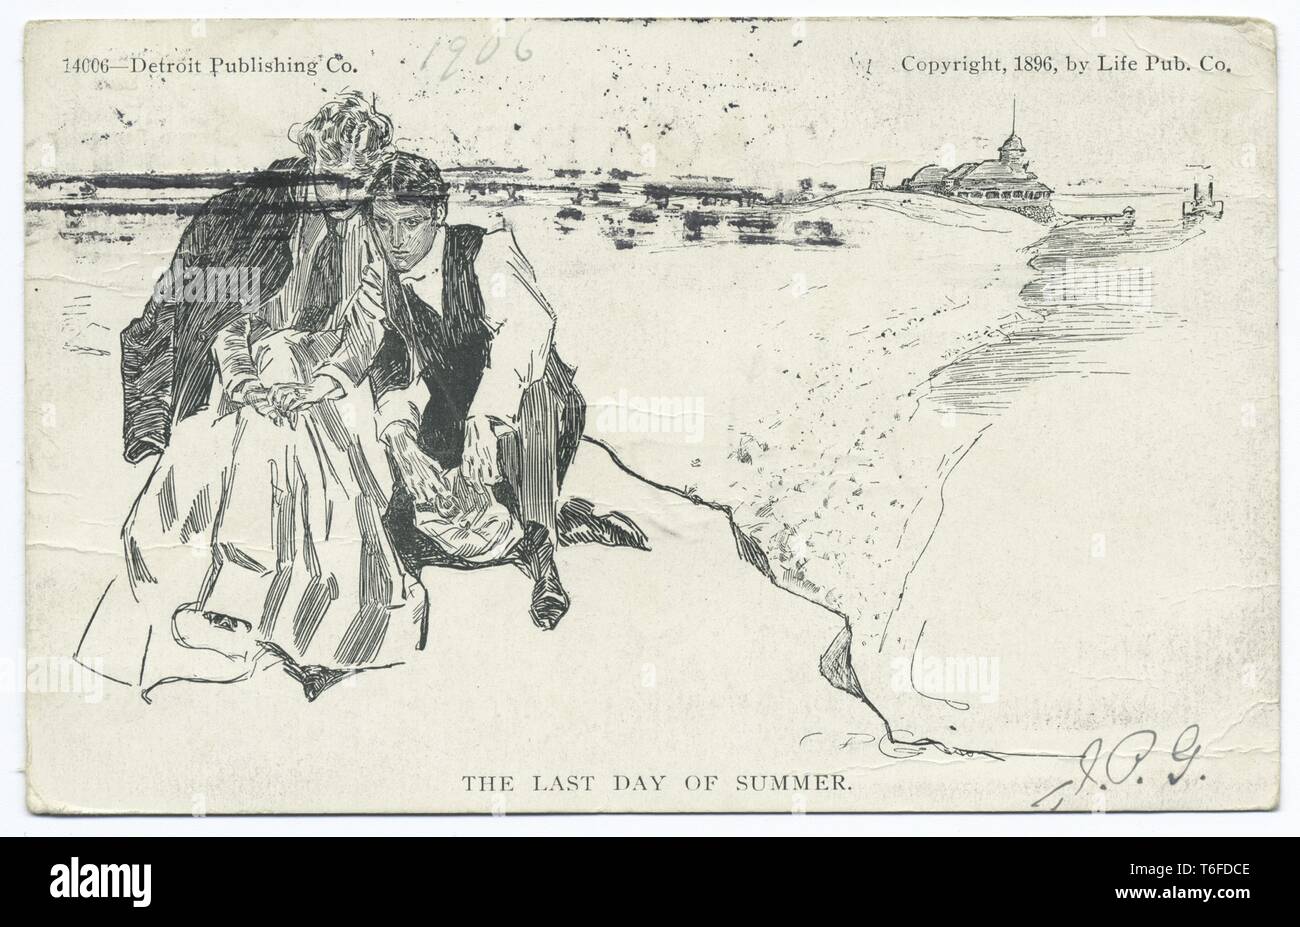 Detroit Publishing Company vintage postcard reproduction of 'The Last Day of Summer', Life Cartoons, just married couple posing for a photo, 1896. From the New York Public Library. () Stock Photo